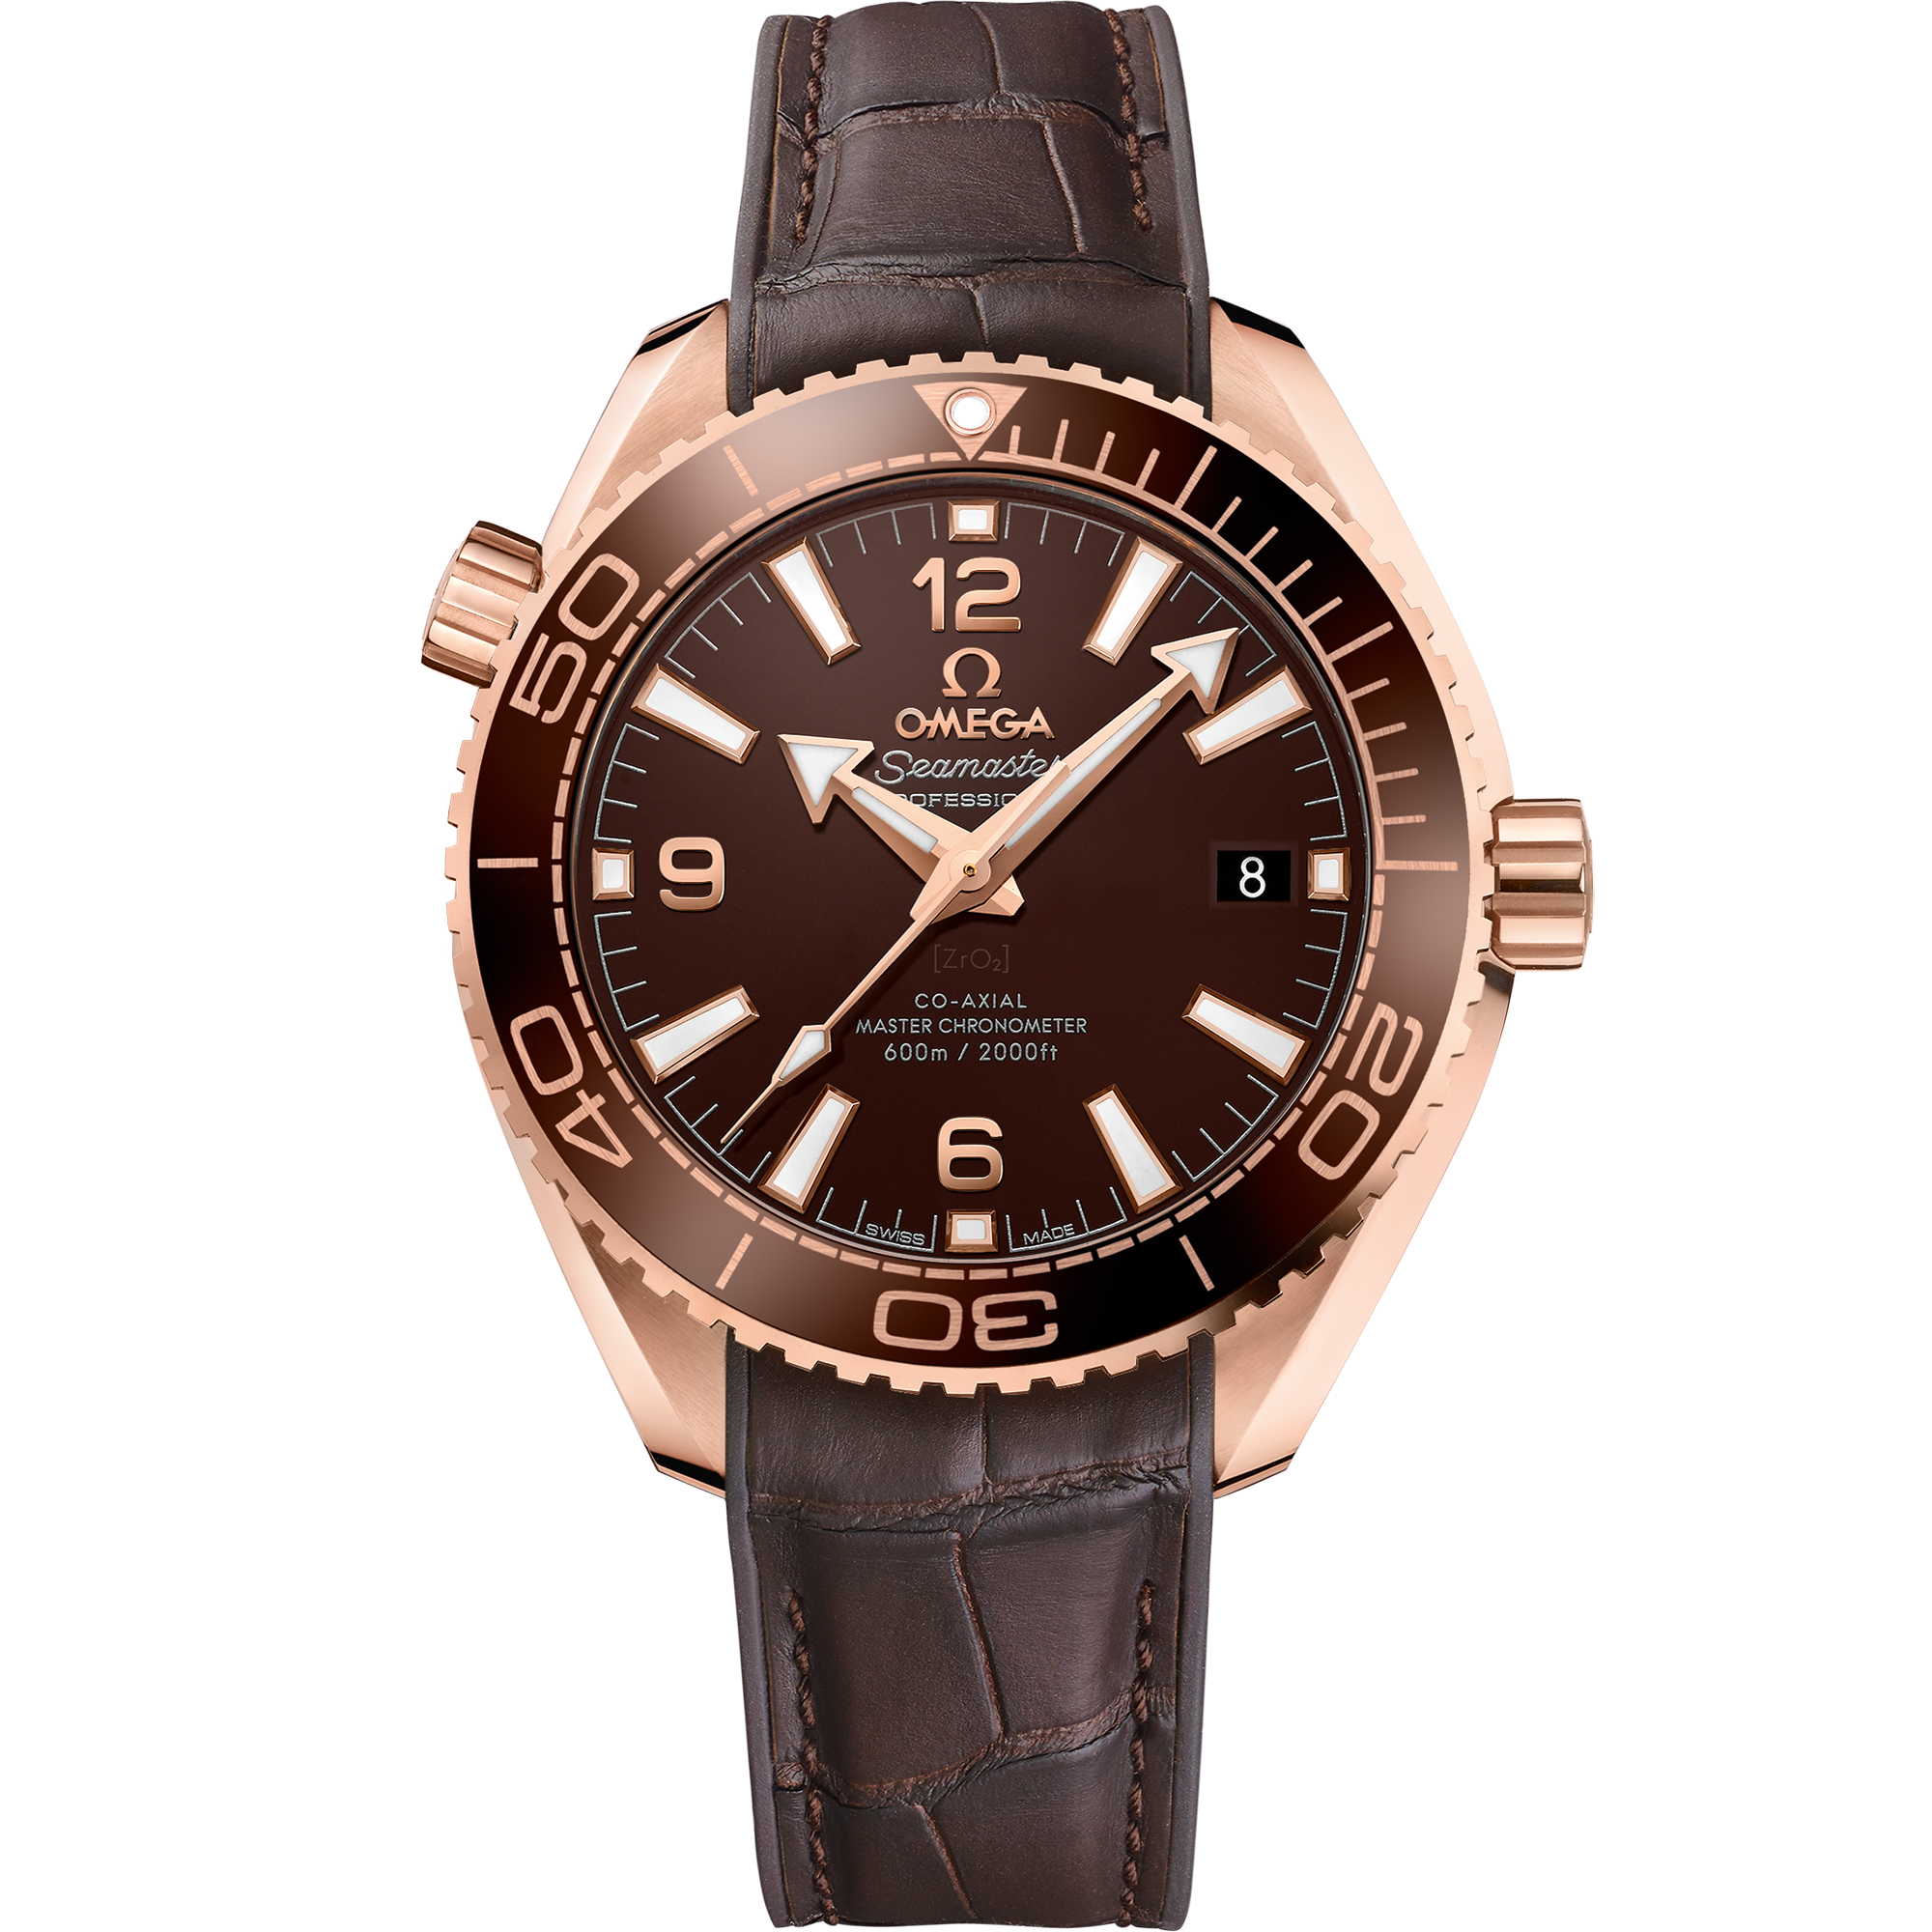 Seamaster Planet Ocean 600M 39.5 mm, Sedna™ gold on leather strap with rubber lining - 215.63.40.20.13.001